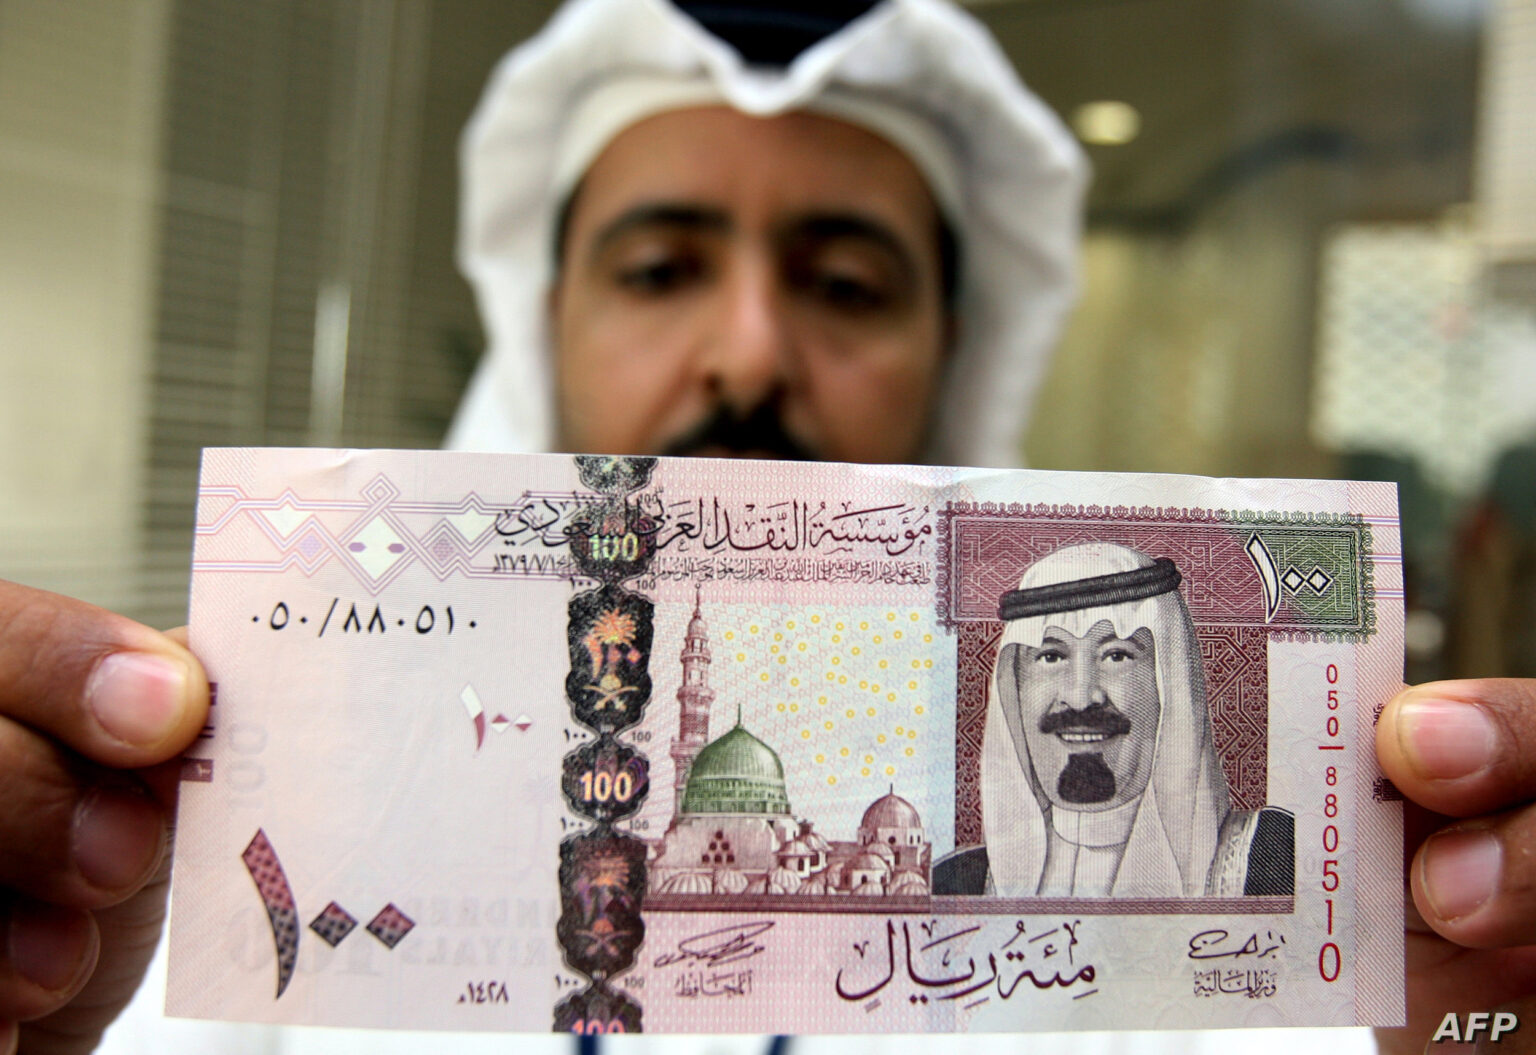 Saudi Arabia’s Central Bank announced, in its monthly report, that its reserves in foreign exchange decreased by 9.19% on an annual basis by the end of 2020